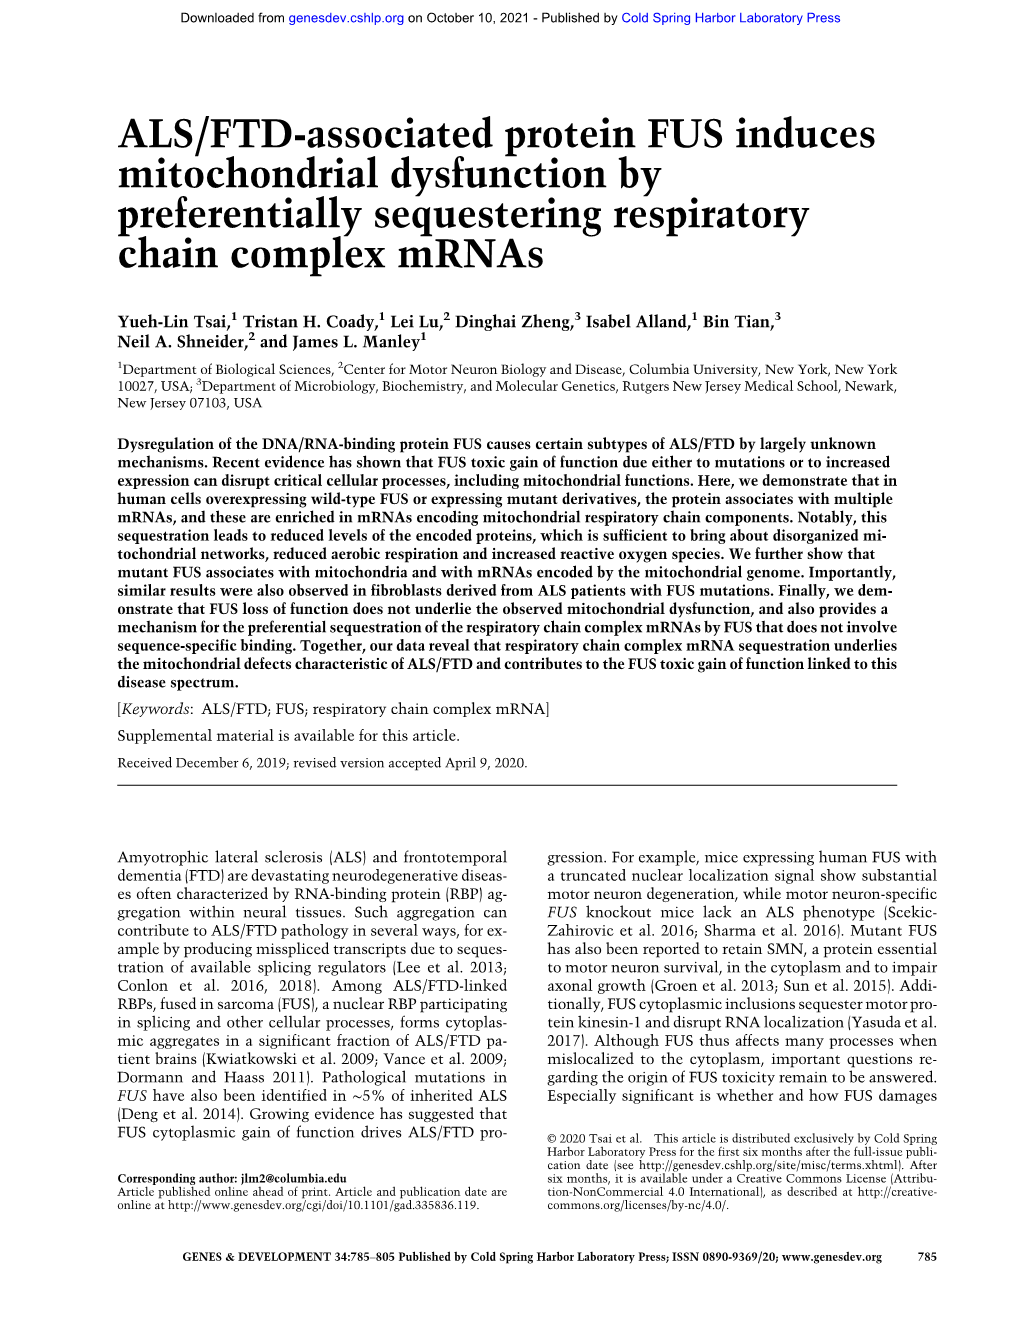 ALS/FTD-Associated Protein FUS Induces Mitochondrial Dysfunction by Preferentially Sequestering Respiratory Chain Complex Mrnas